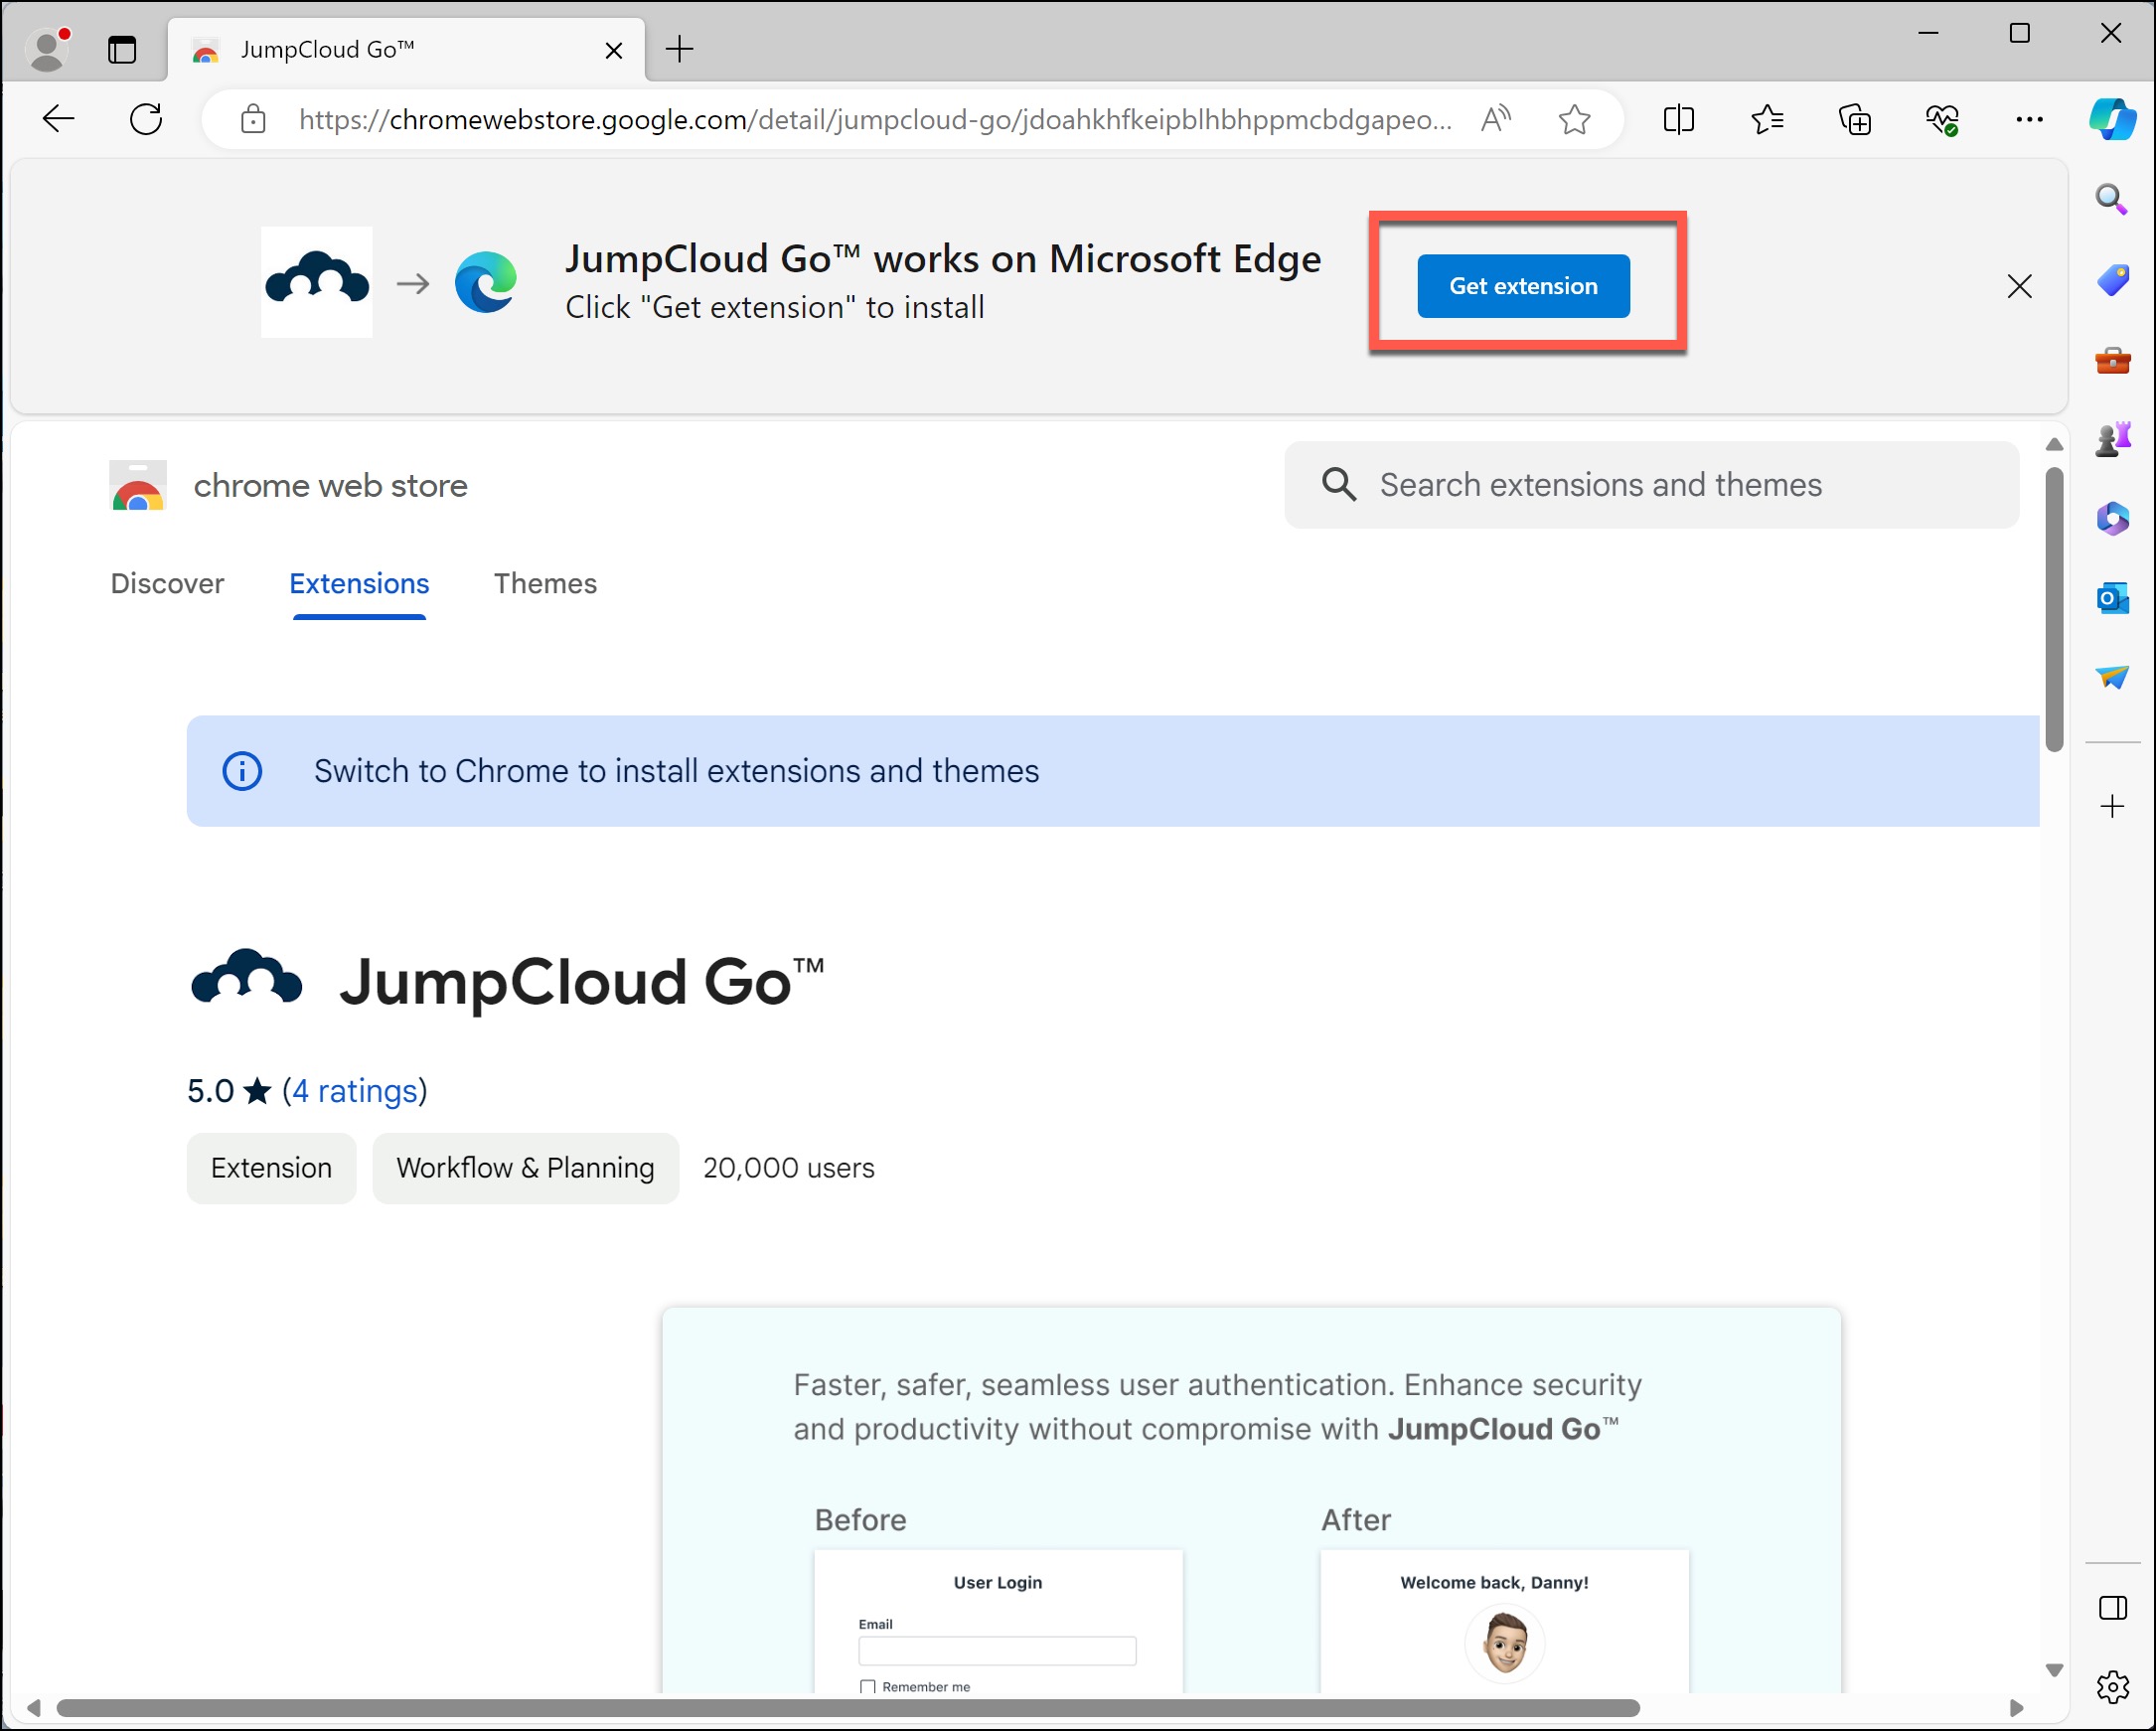 Add the JumpCloud Go extension from the Chrome web store in Microsoft Edge.